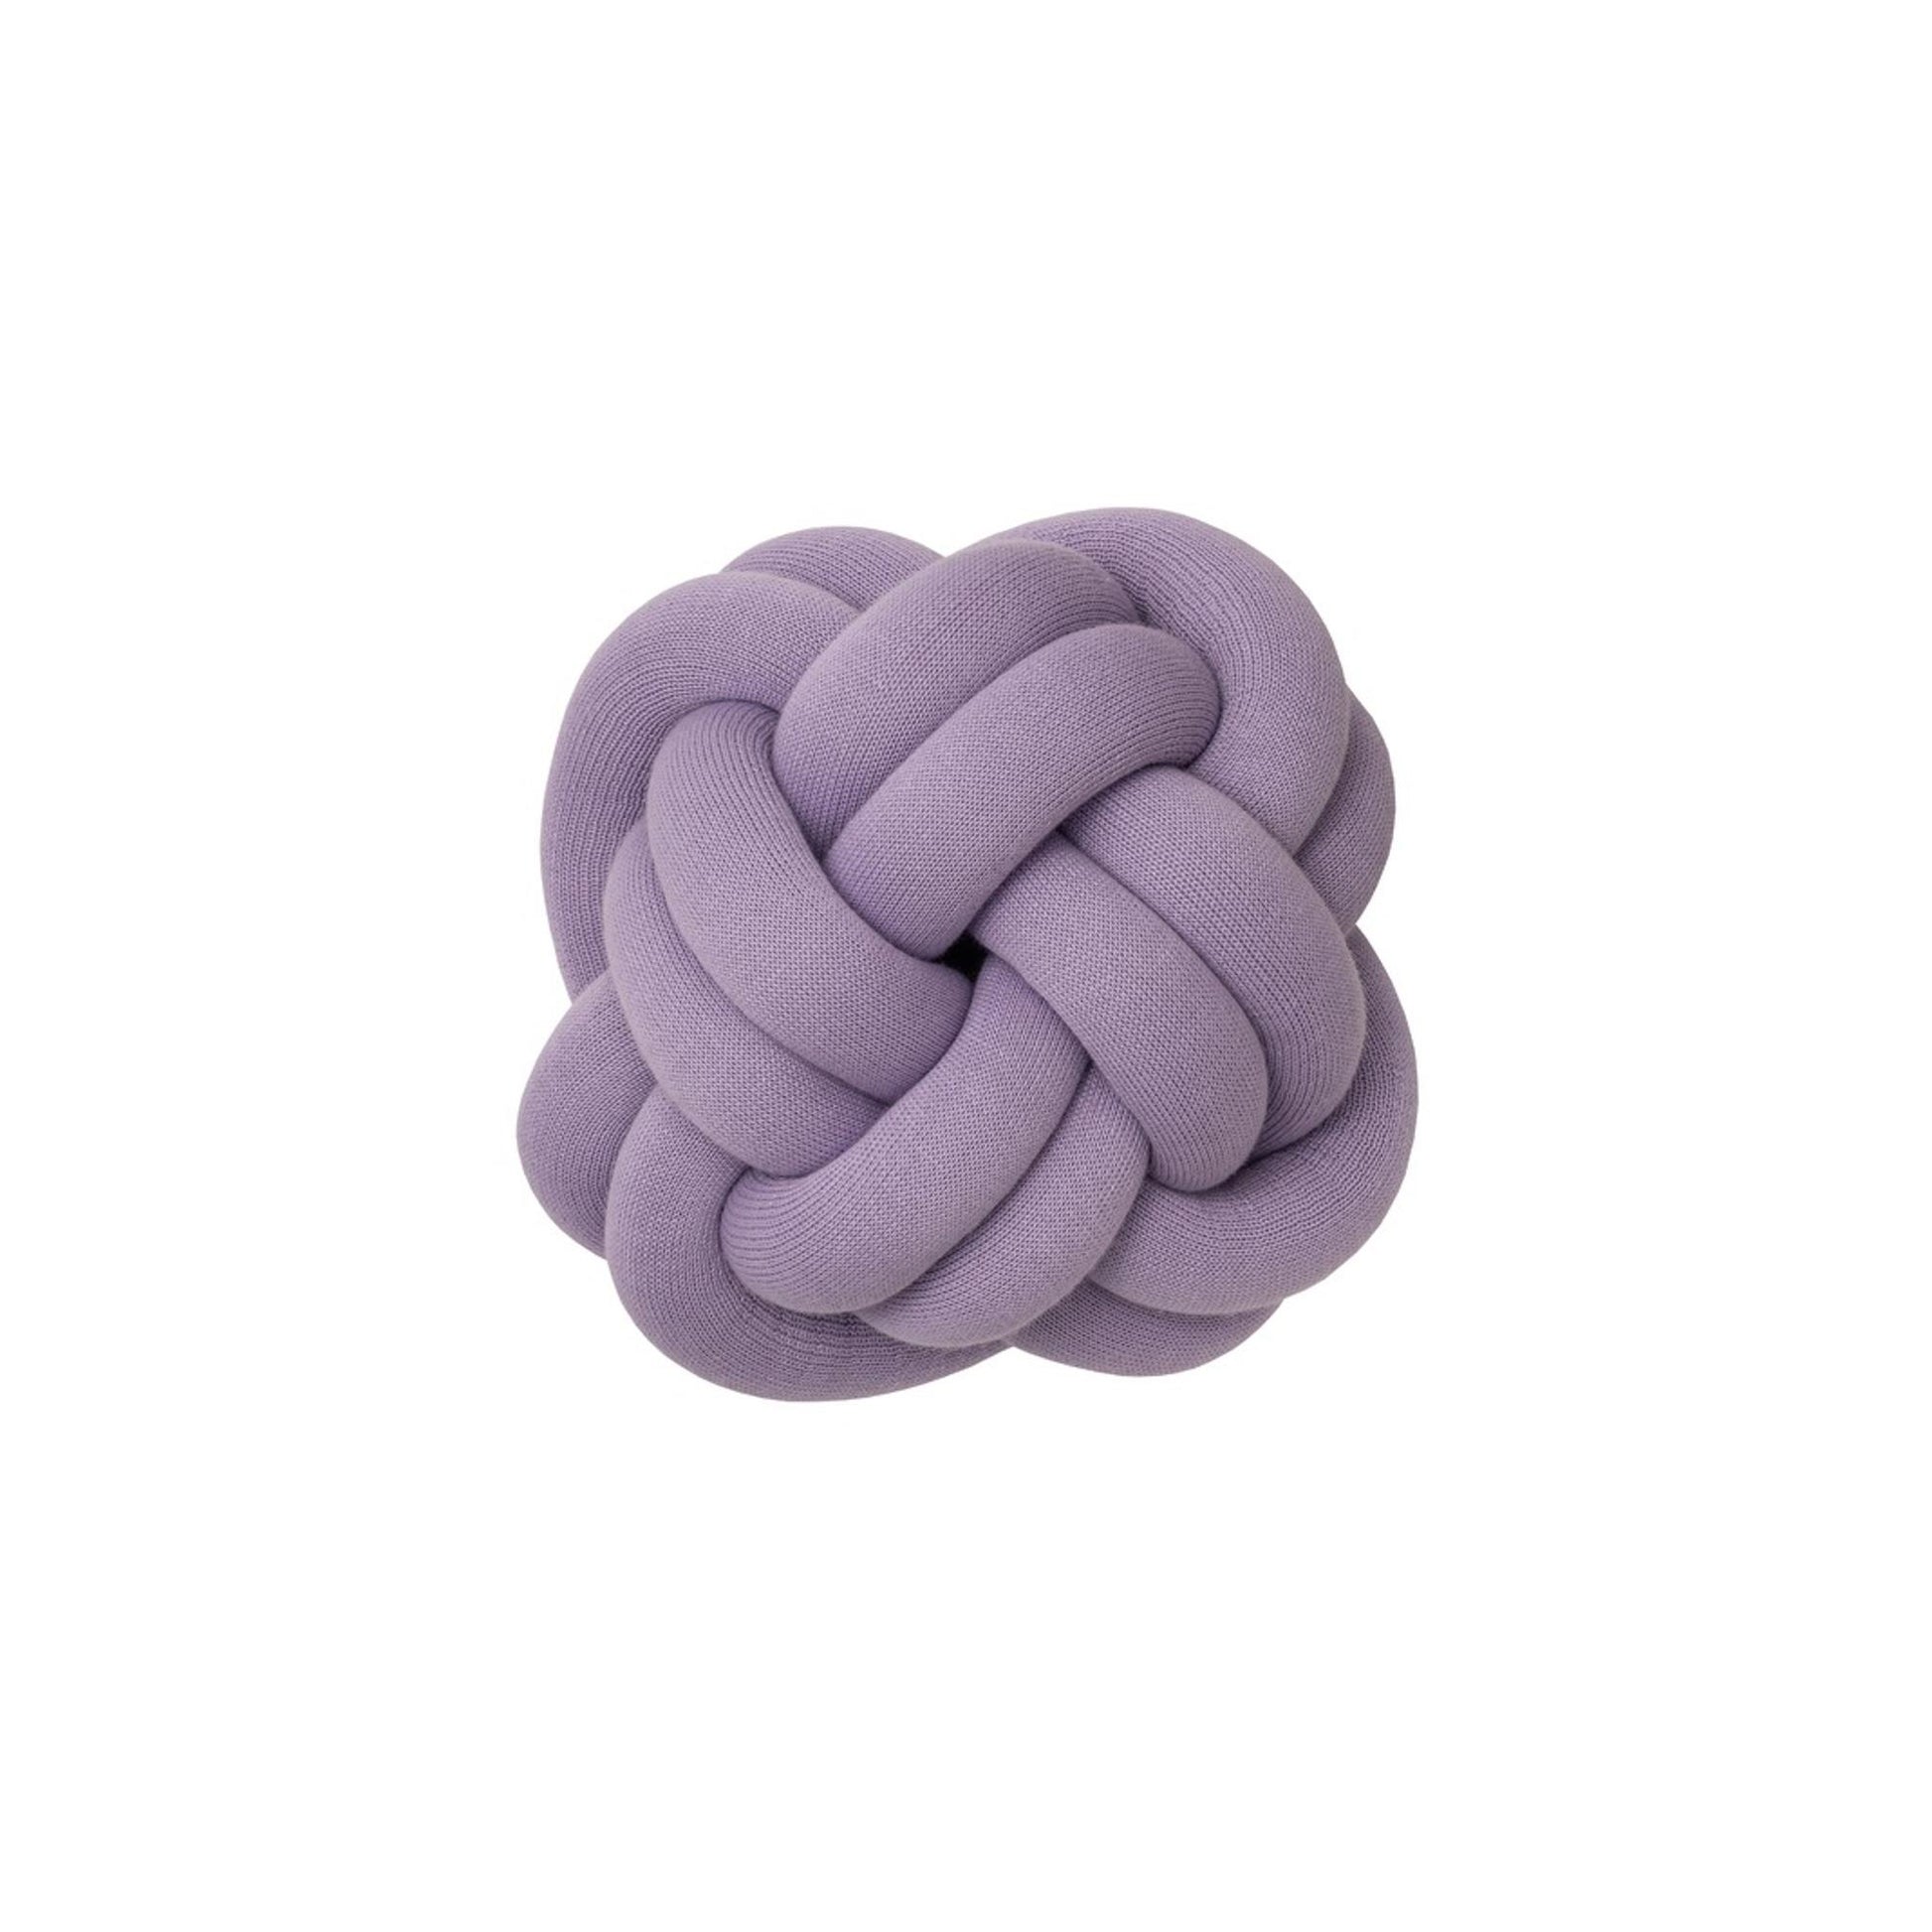 Knot Cushion by Design House Stockholm #Purple